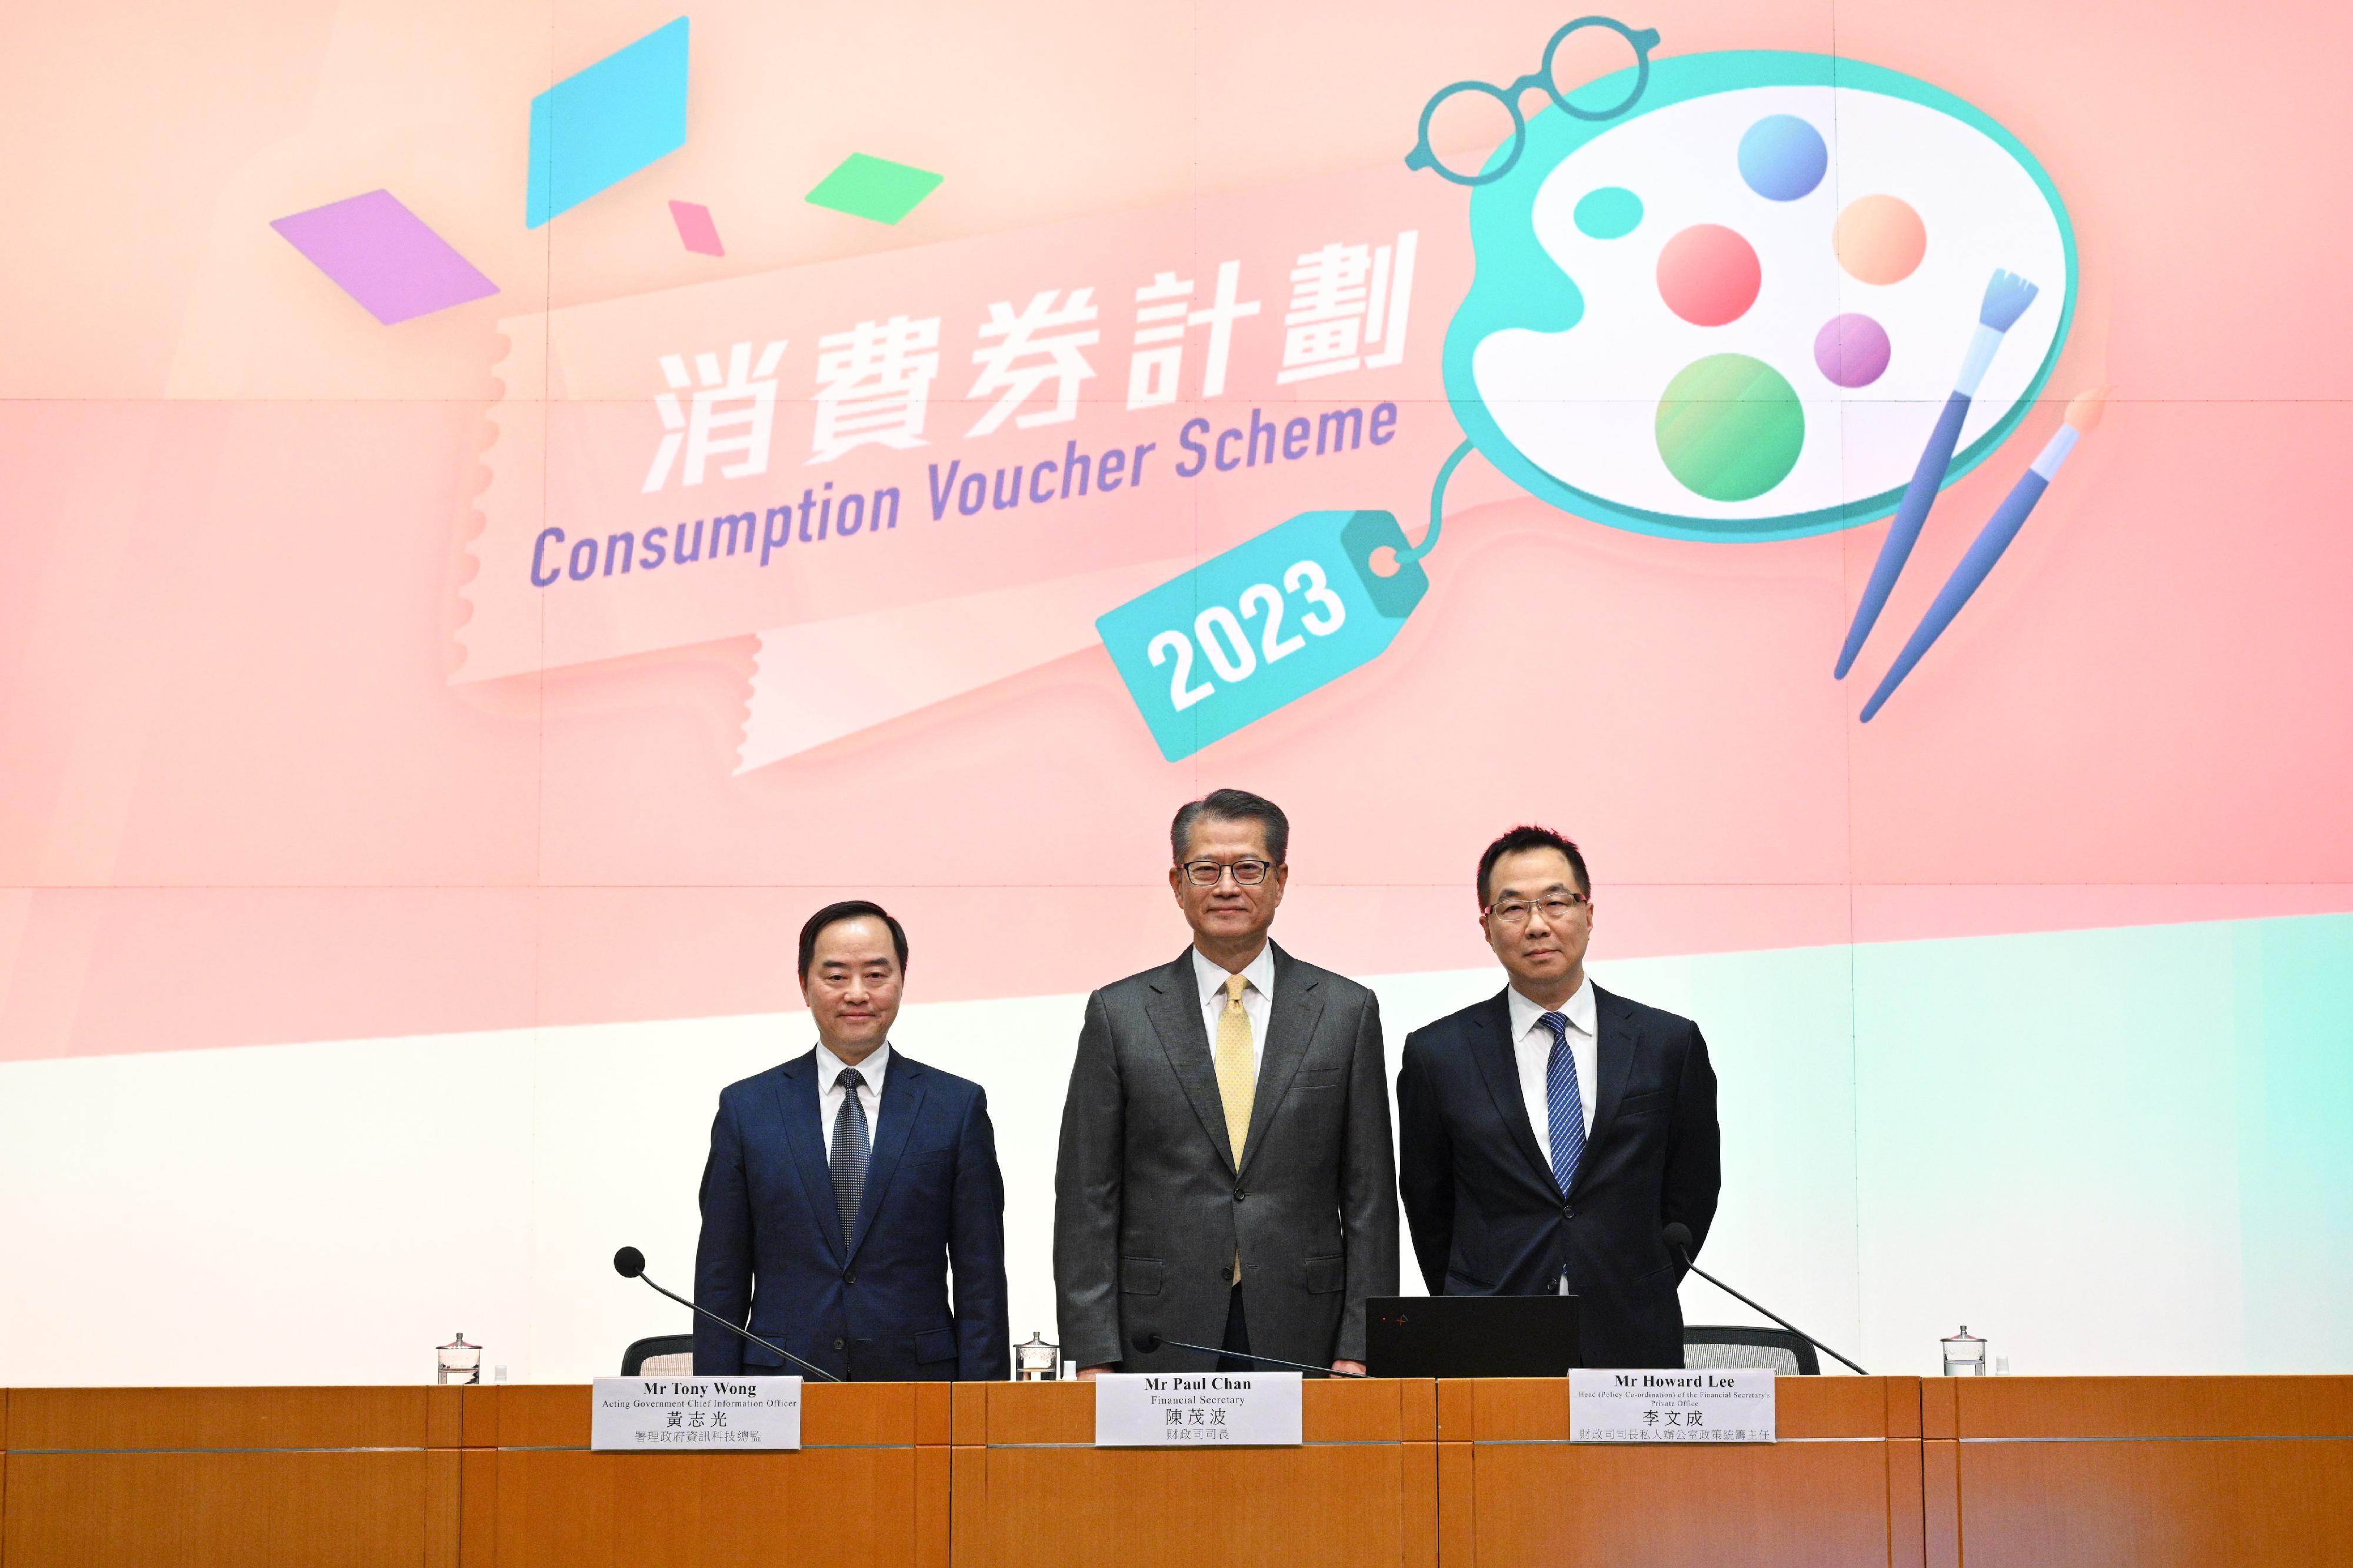 The Financial Secretary, Mr Paul Chan (centre), holds a press conference to announce details of the 2023 Consumption Voucher Scheme with the Acting Government Chief Information Officer, Mr Tony Wong (left), and the Head (Policy Co-ordination) of the Financial Secretary's Private Office, Mr Howard Lee (right), at the Central Government Offices, Tamar, this afternoon (March 10).